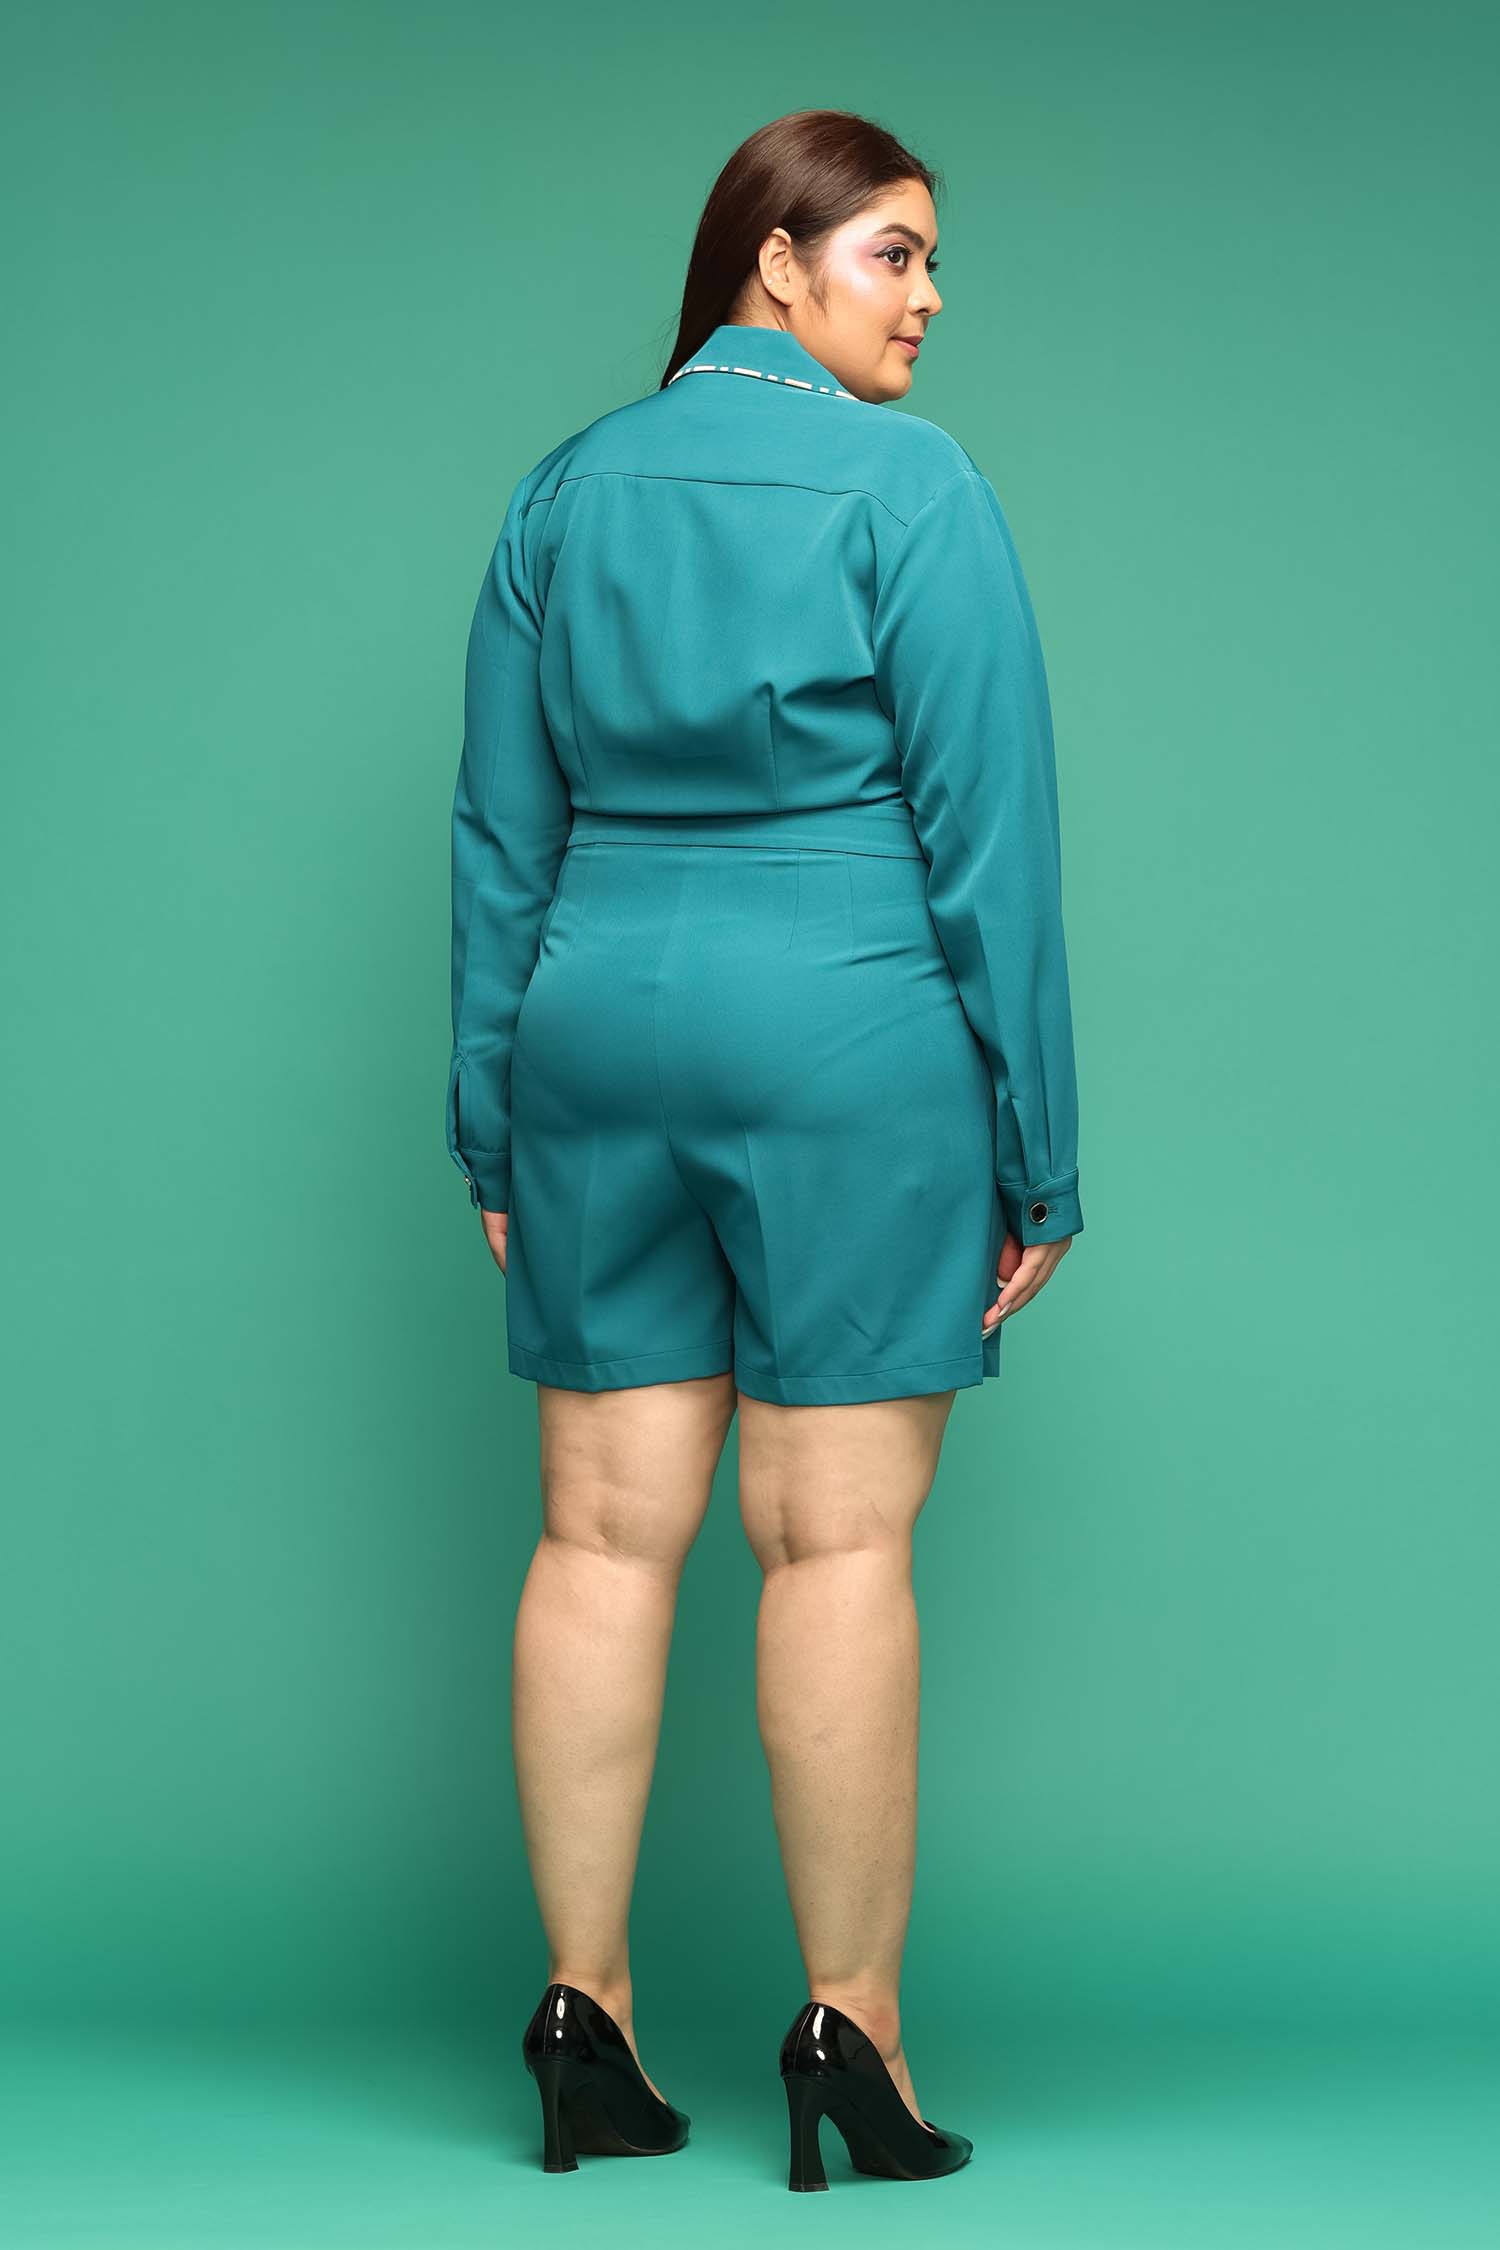 Teal Blue Embroidered Playsuit